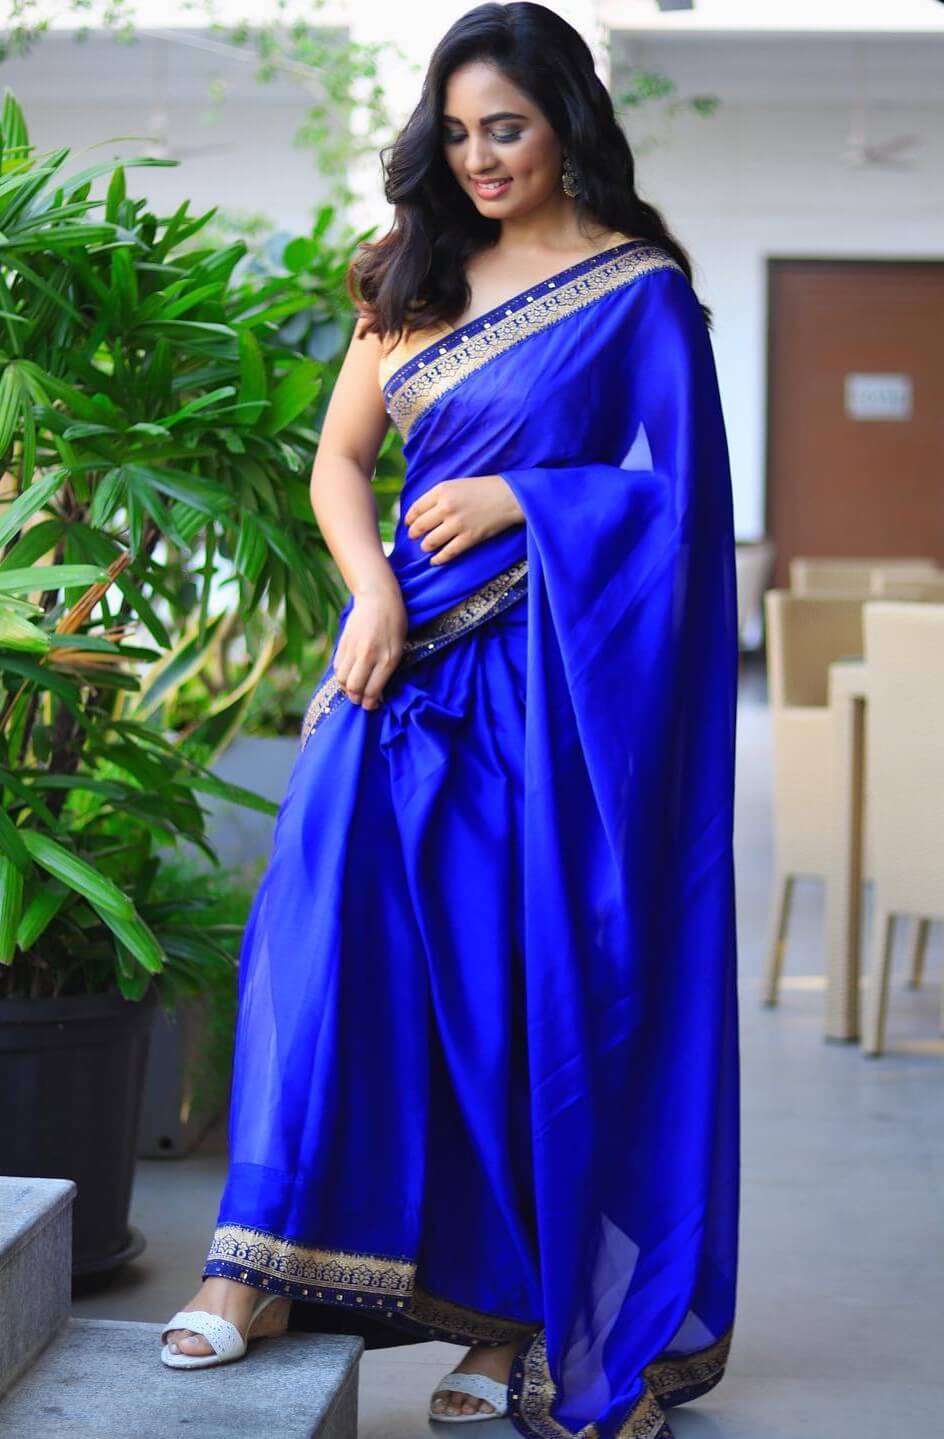 Srushti Dange In Royal Blue Solid Saree Paired With Golden Blouse